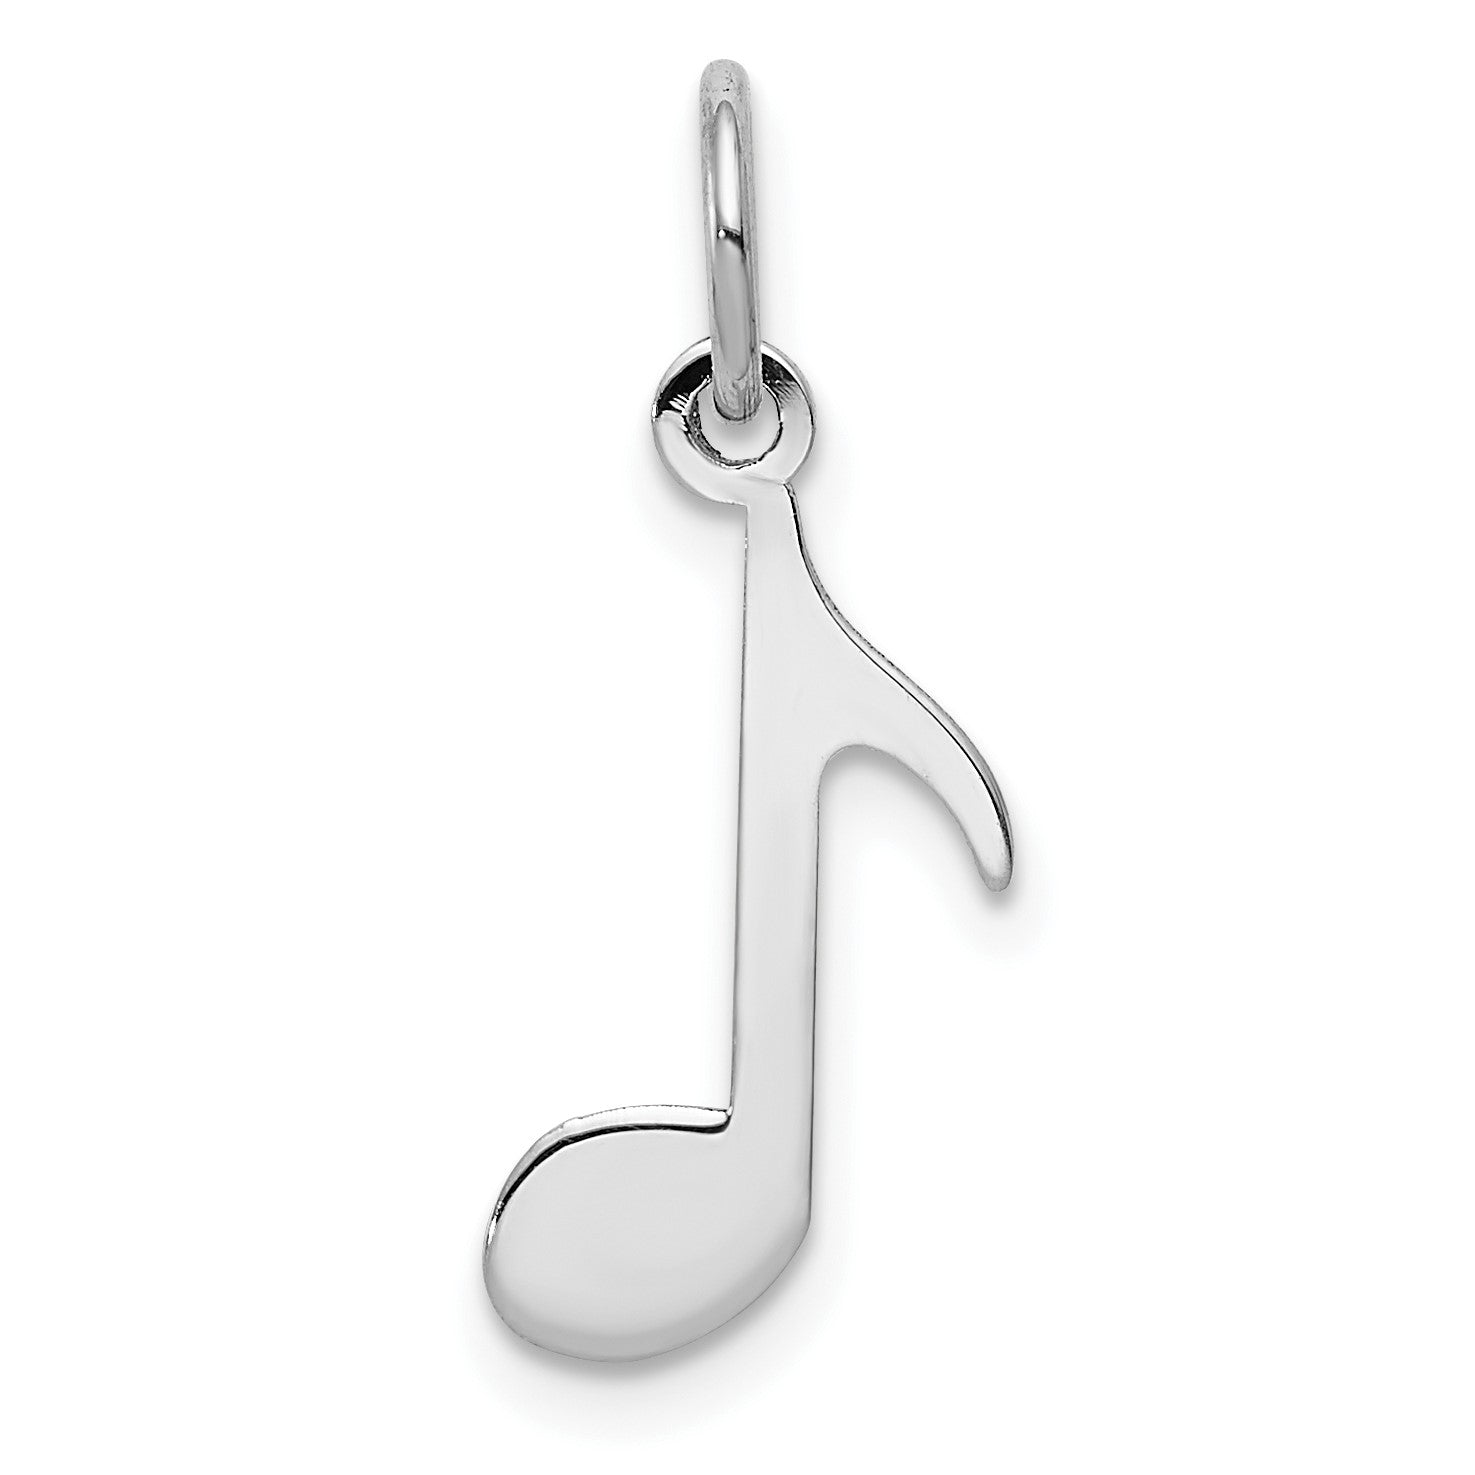 14KT White Gold 21X10MM Musical Note Pendant. Chain Not Included